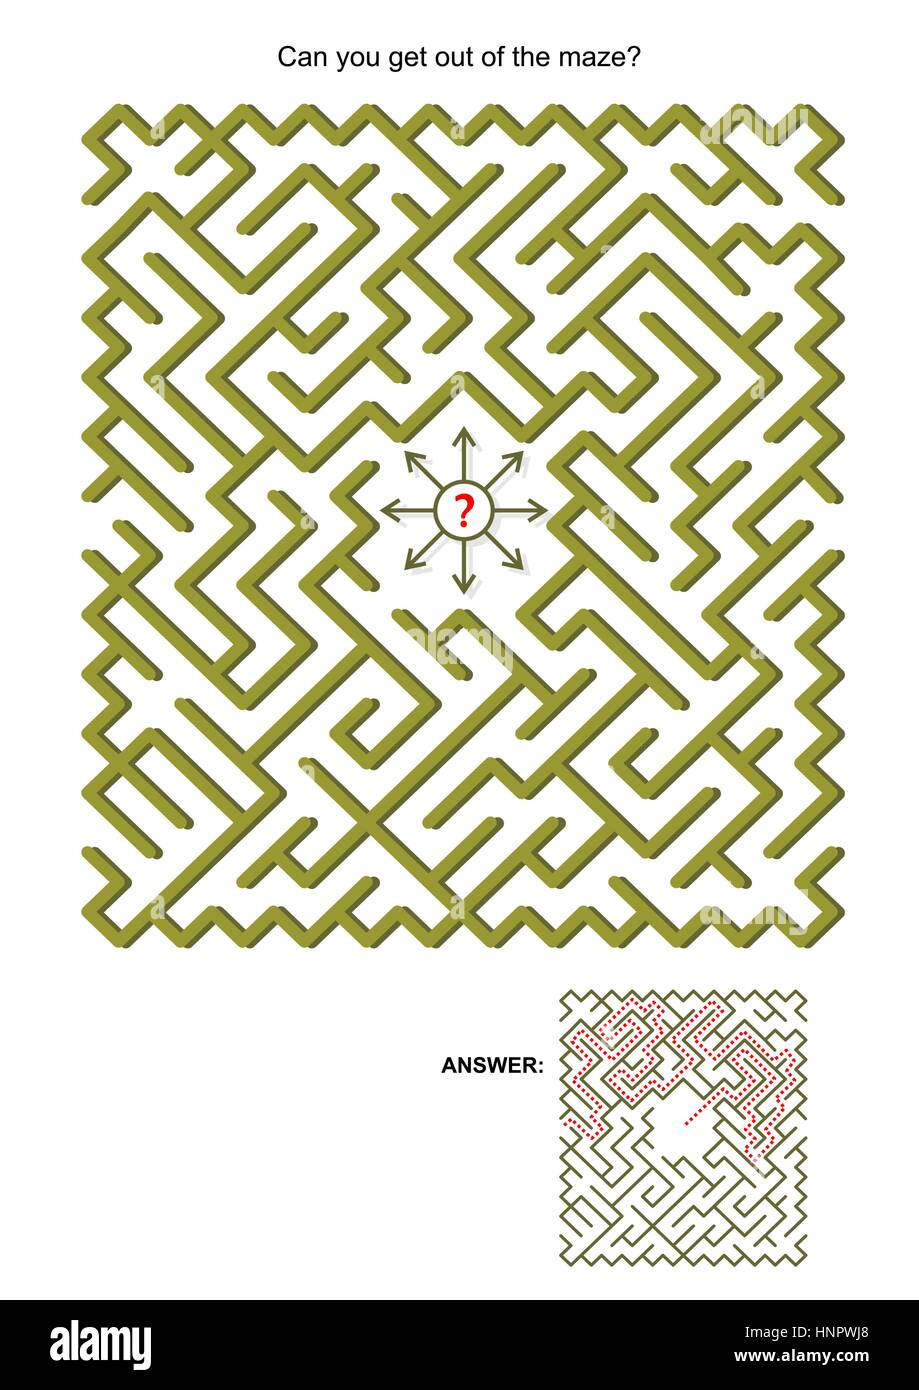 Maze game for kids or adults: Can you get out of the maze? Answers included. Stock Vector